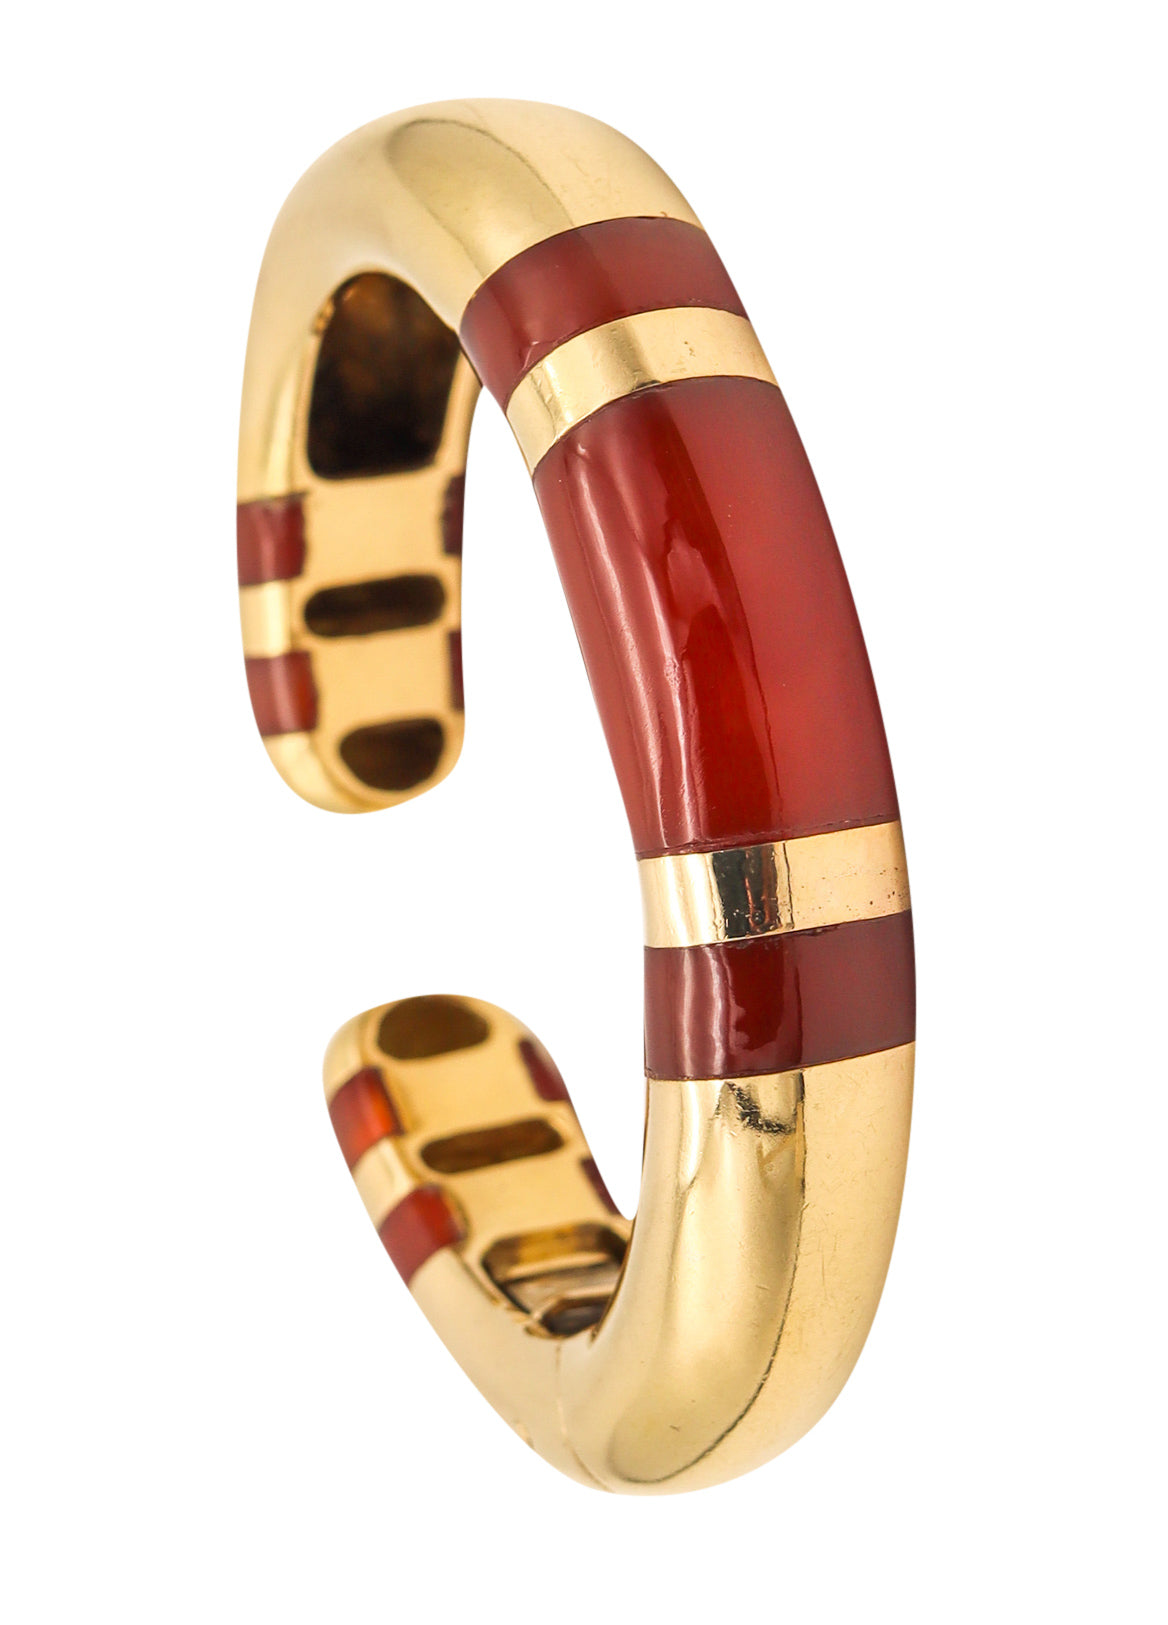 Tiffany And Co 1973 Sonia Younis Bracelet Cuff In 18Kt Yellow Gold With Reddish Carnelian